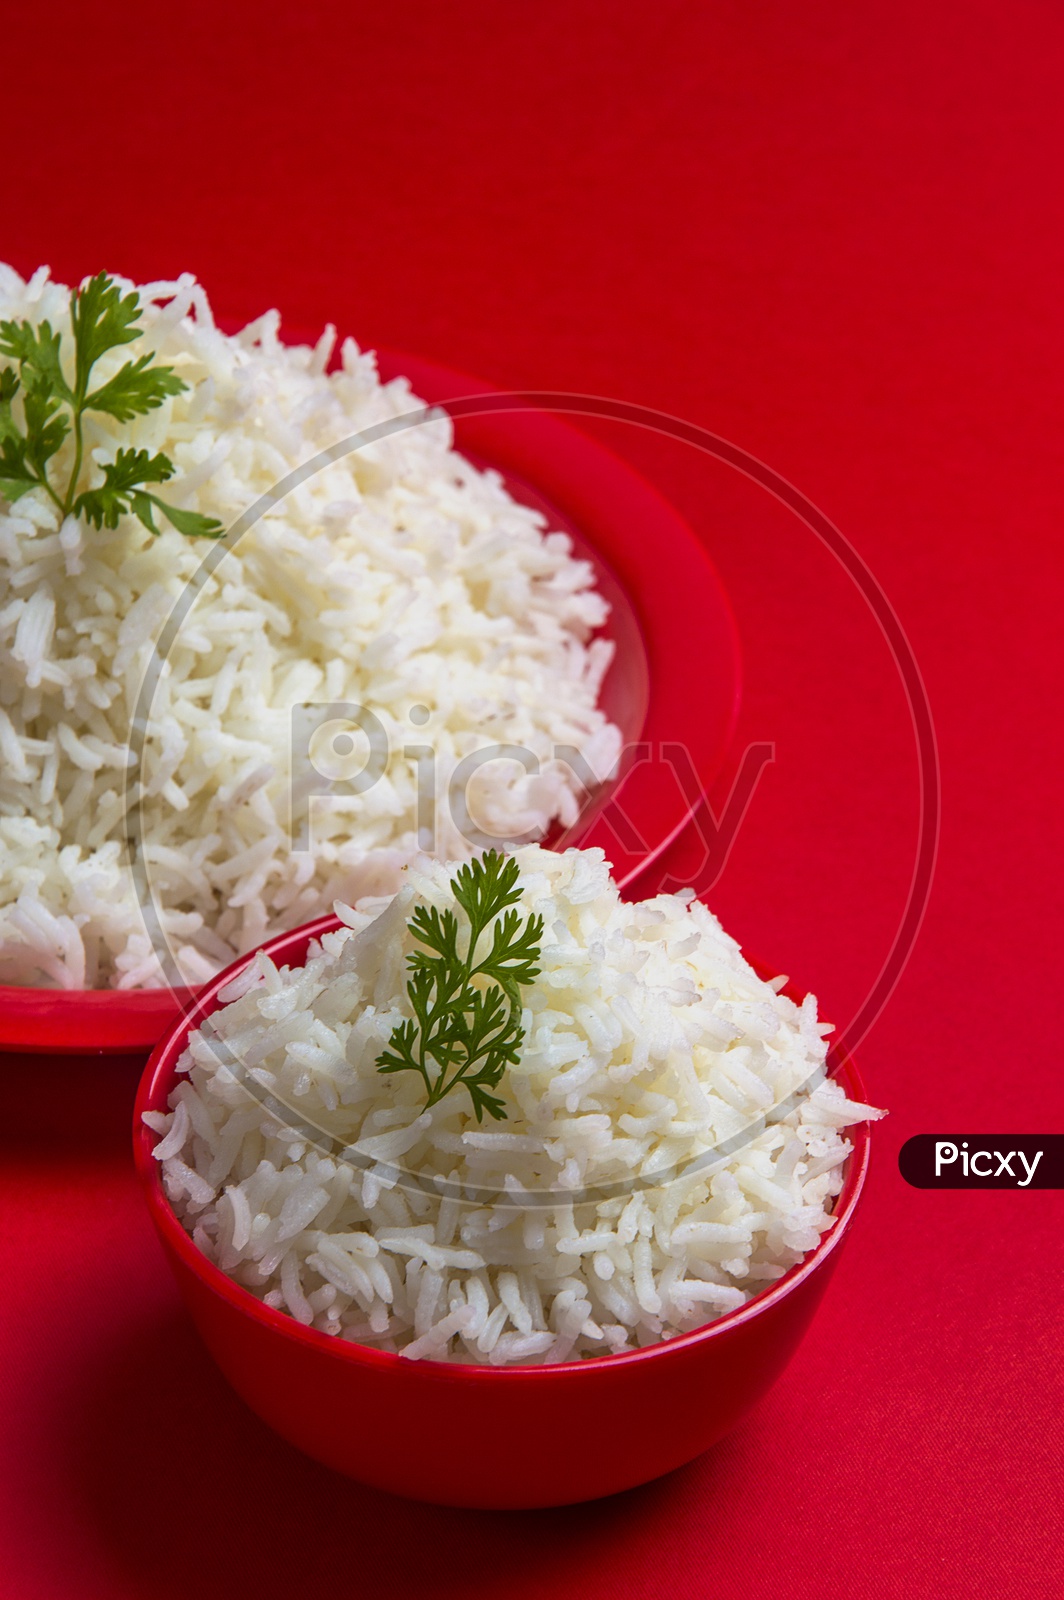 Cooked plain white basmati rice in bowl and plate on red background.